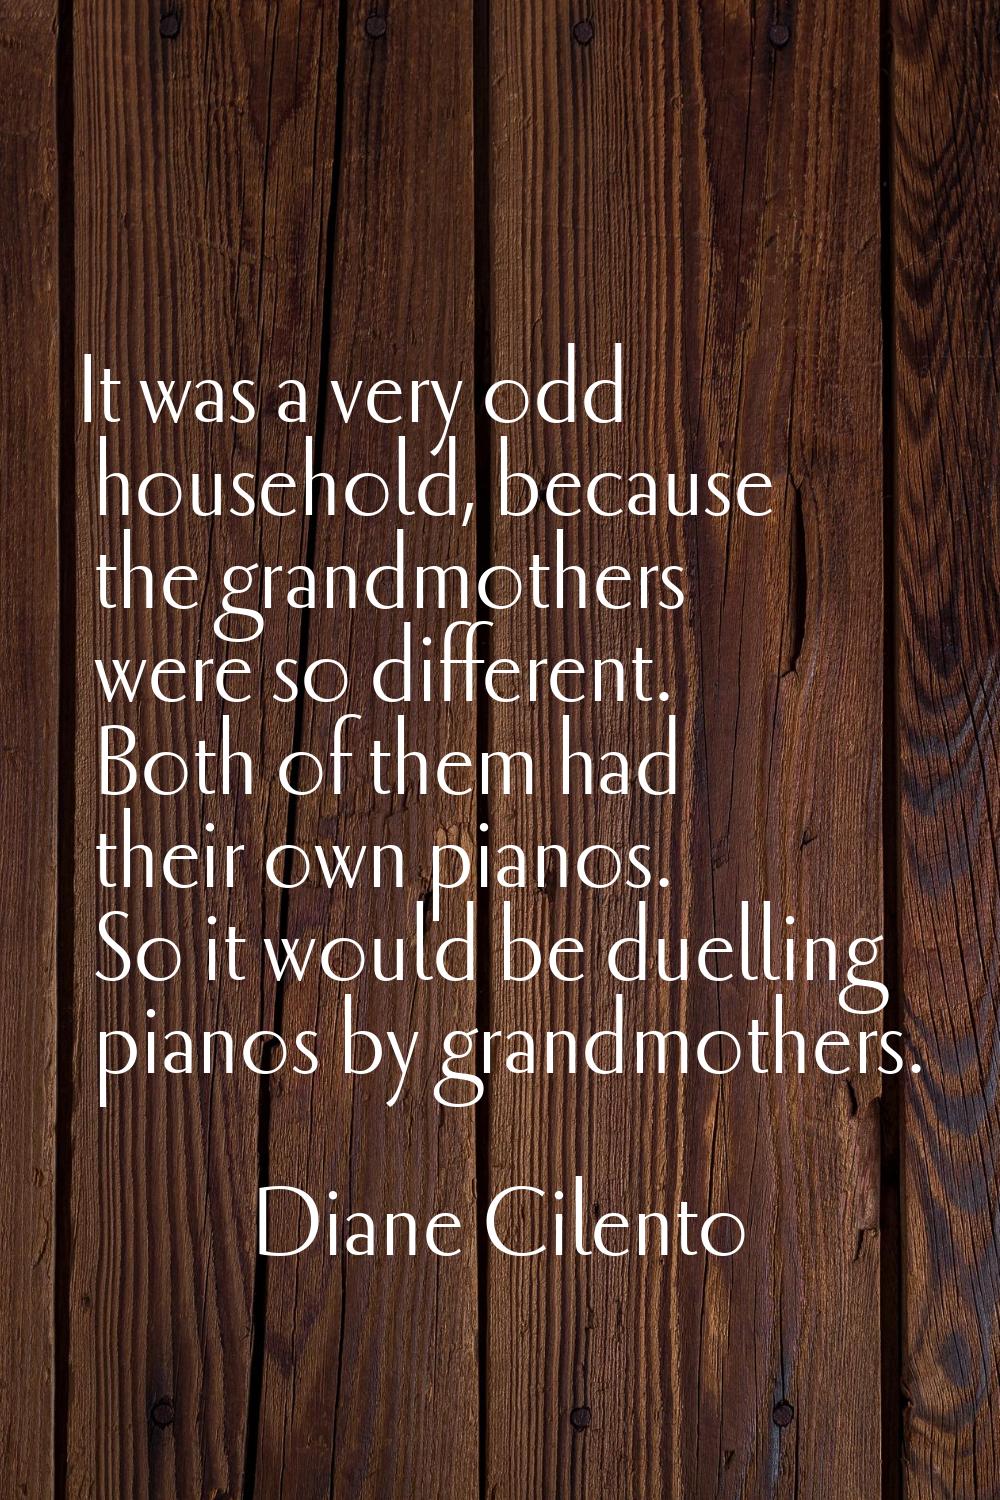 It was a very odd household, because the grandmothers were so different. Both of them had their own